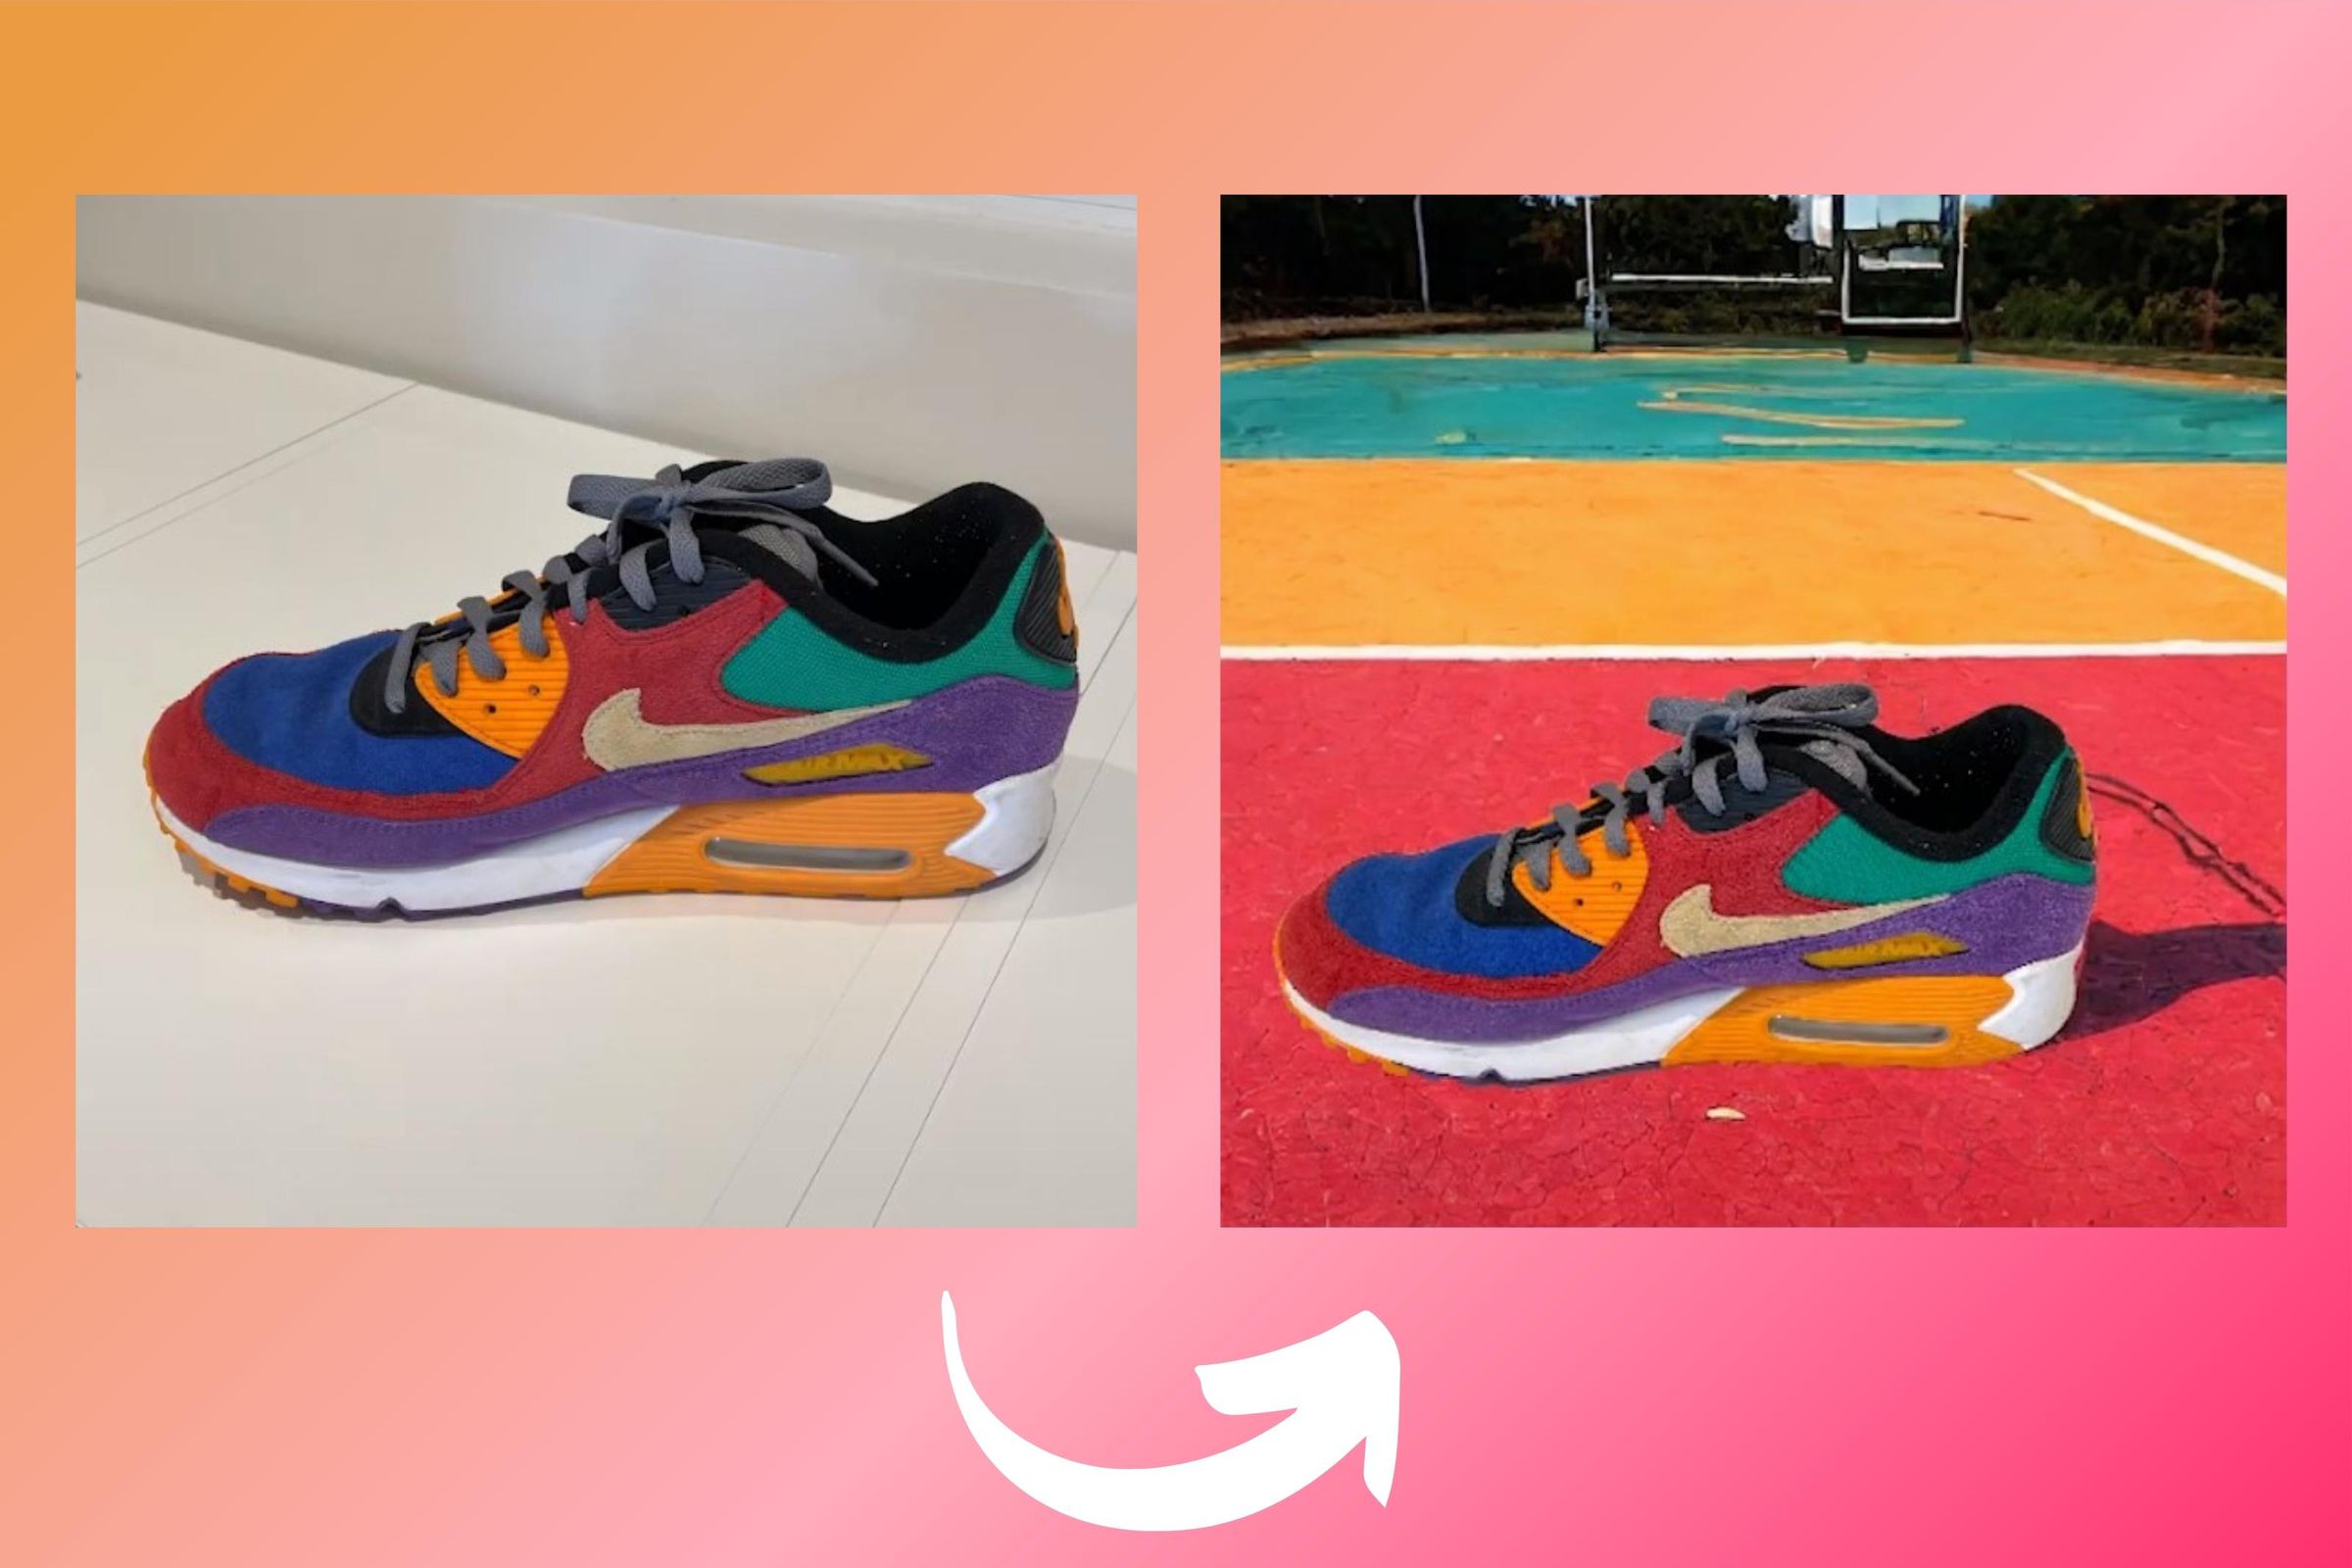 Two photographs of the same sneaker shoe. One is the original, another is the sneaker on an AI-generated background of outdoor sports court.